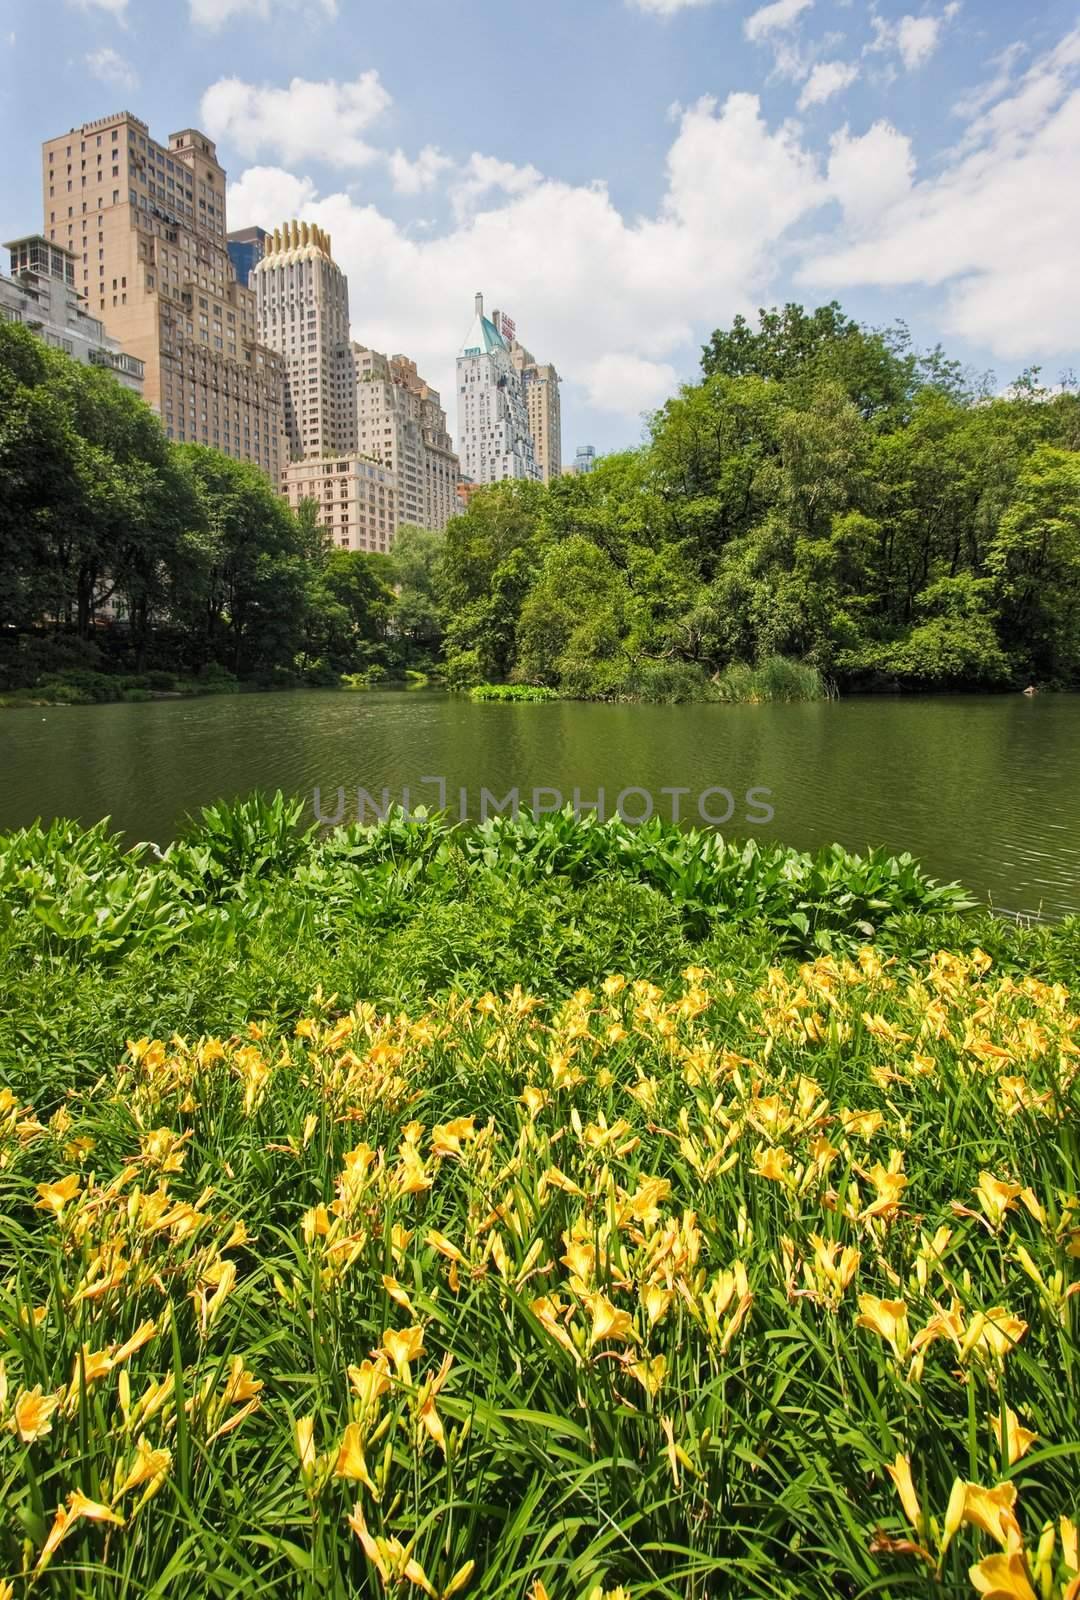 A pond in central park with high rise buildings behind it in New York City. There are yellow flowers in the foreground.